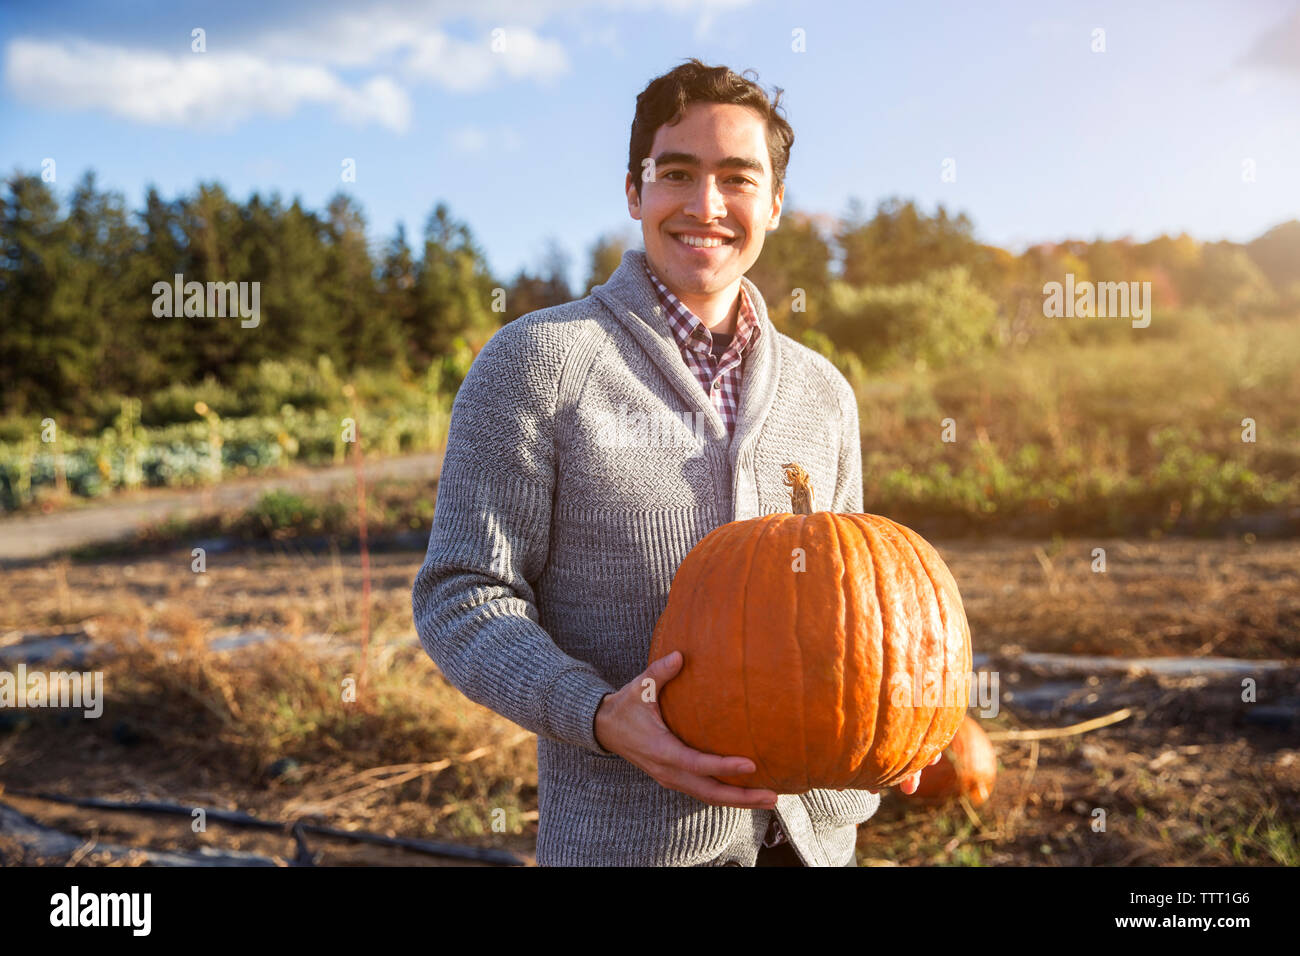 Portrait of man carrying pumpkin while standing in farm against sky Stock Photo